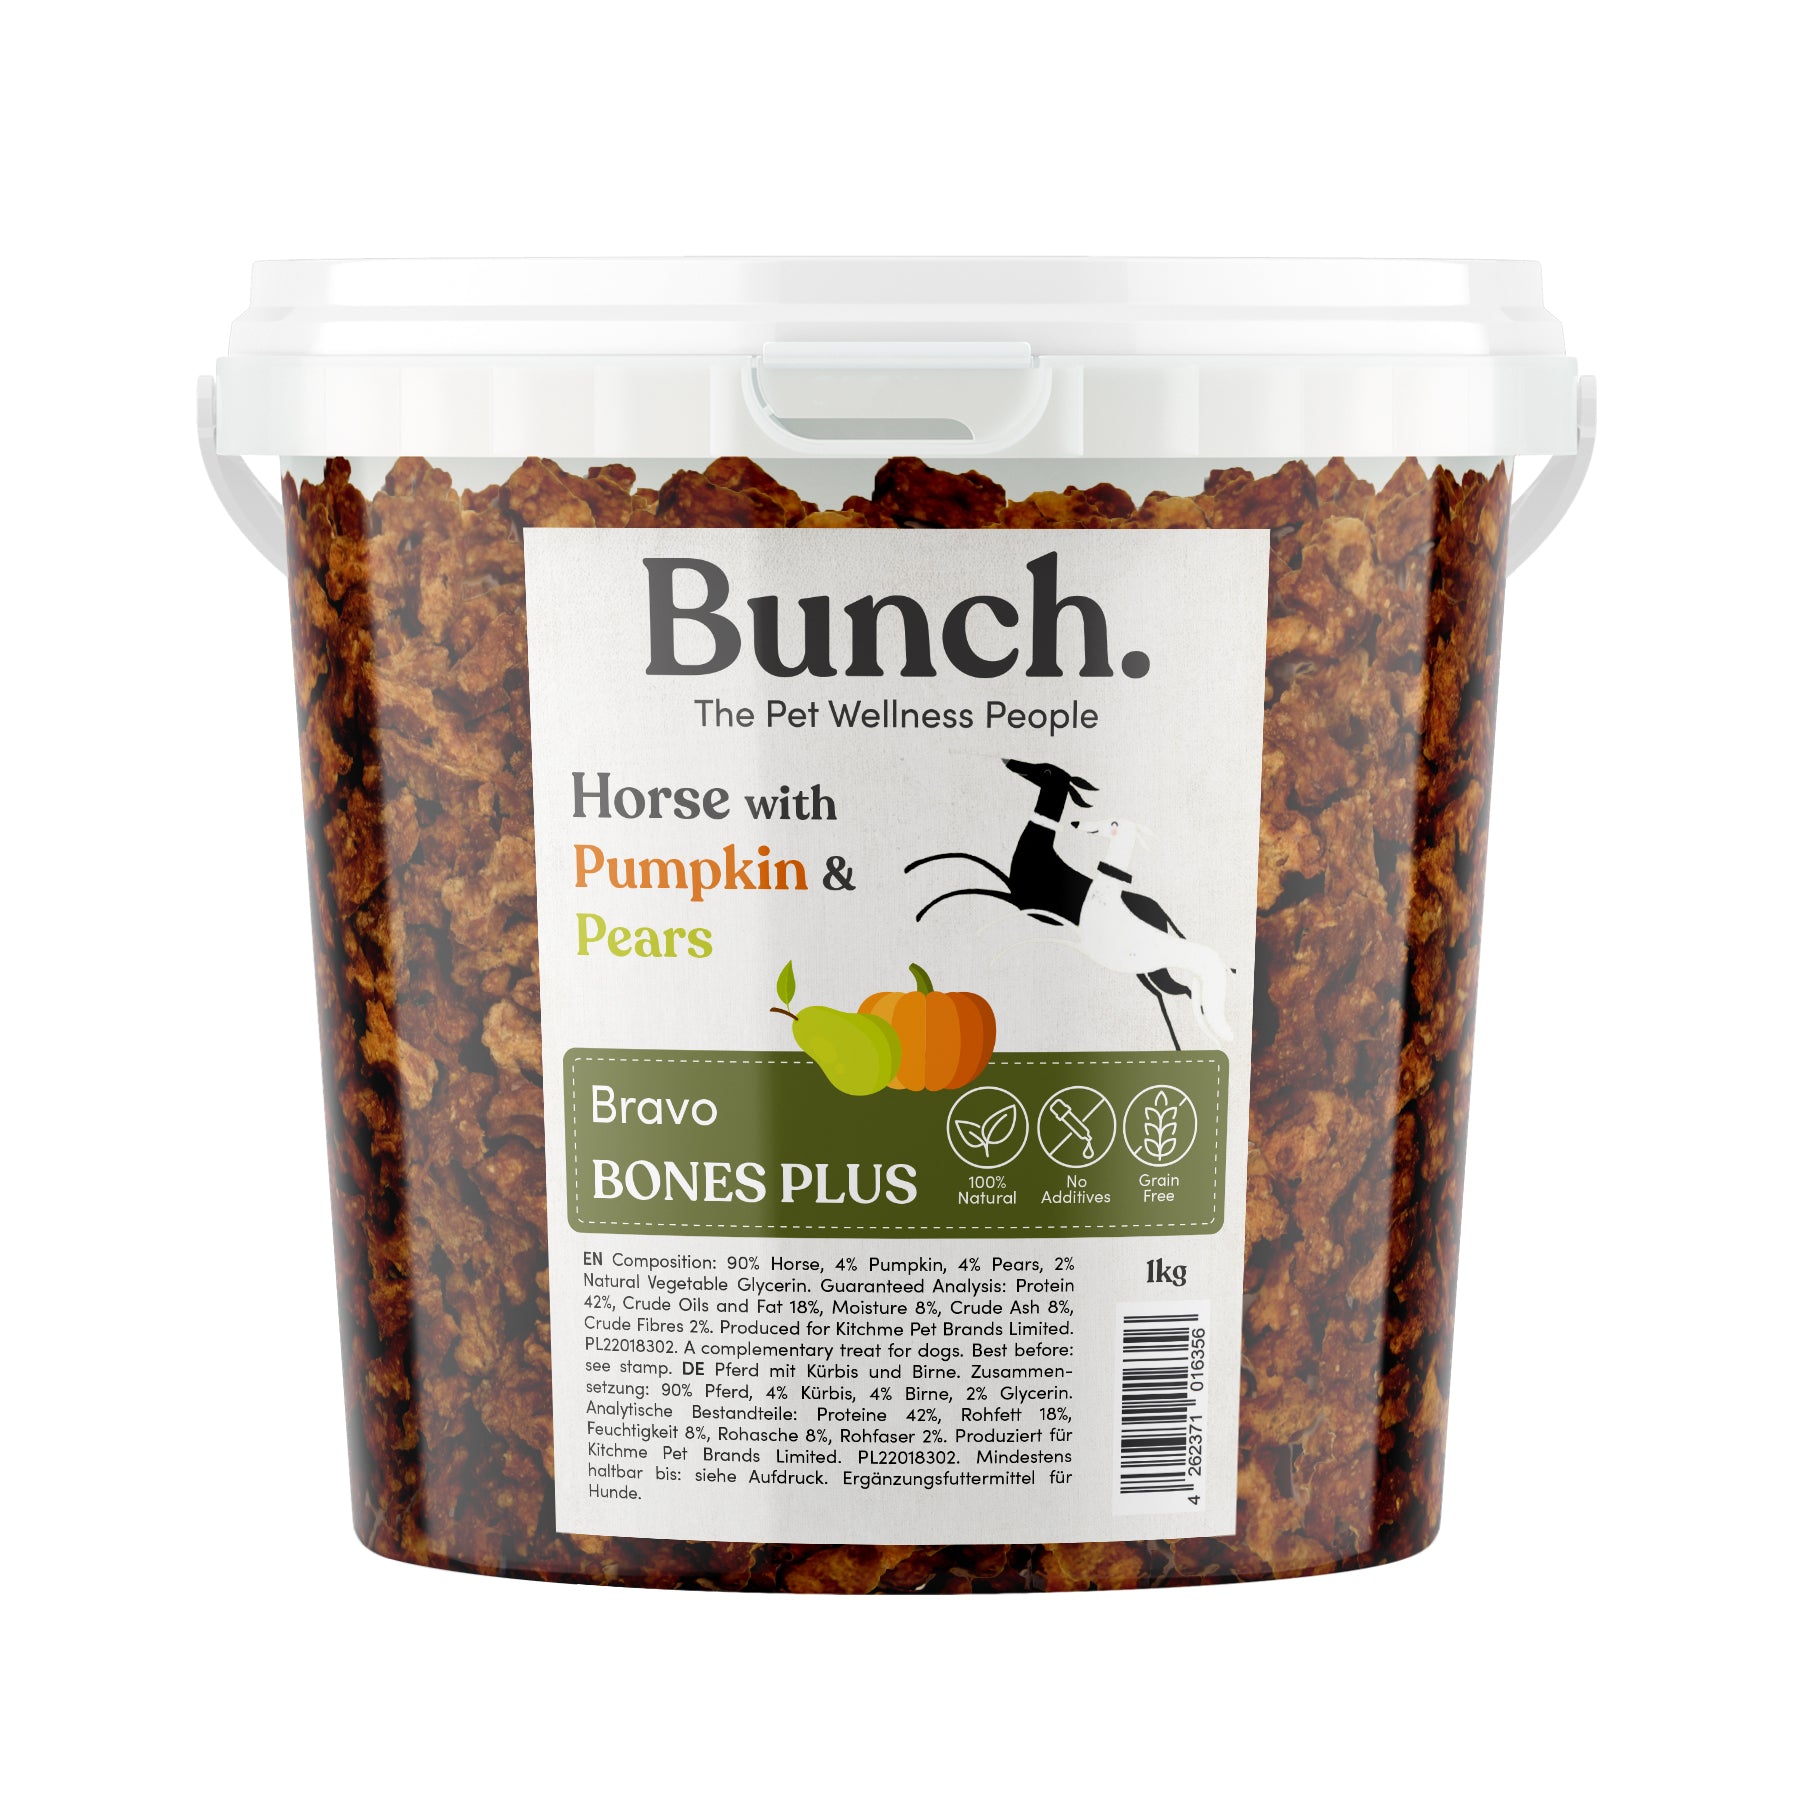 Mini Horse Training Bones with Pumpkin and Pears by Bunch (1kg-Bucket)